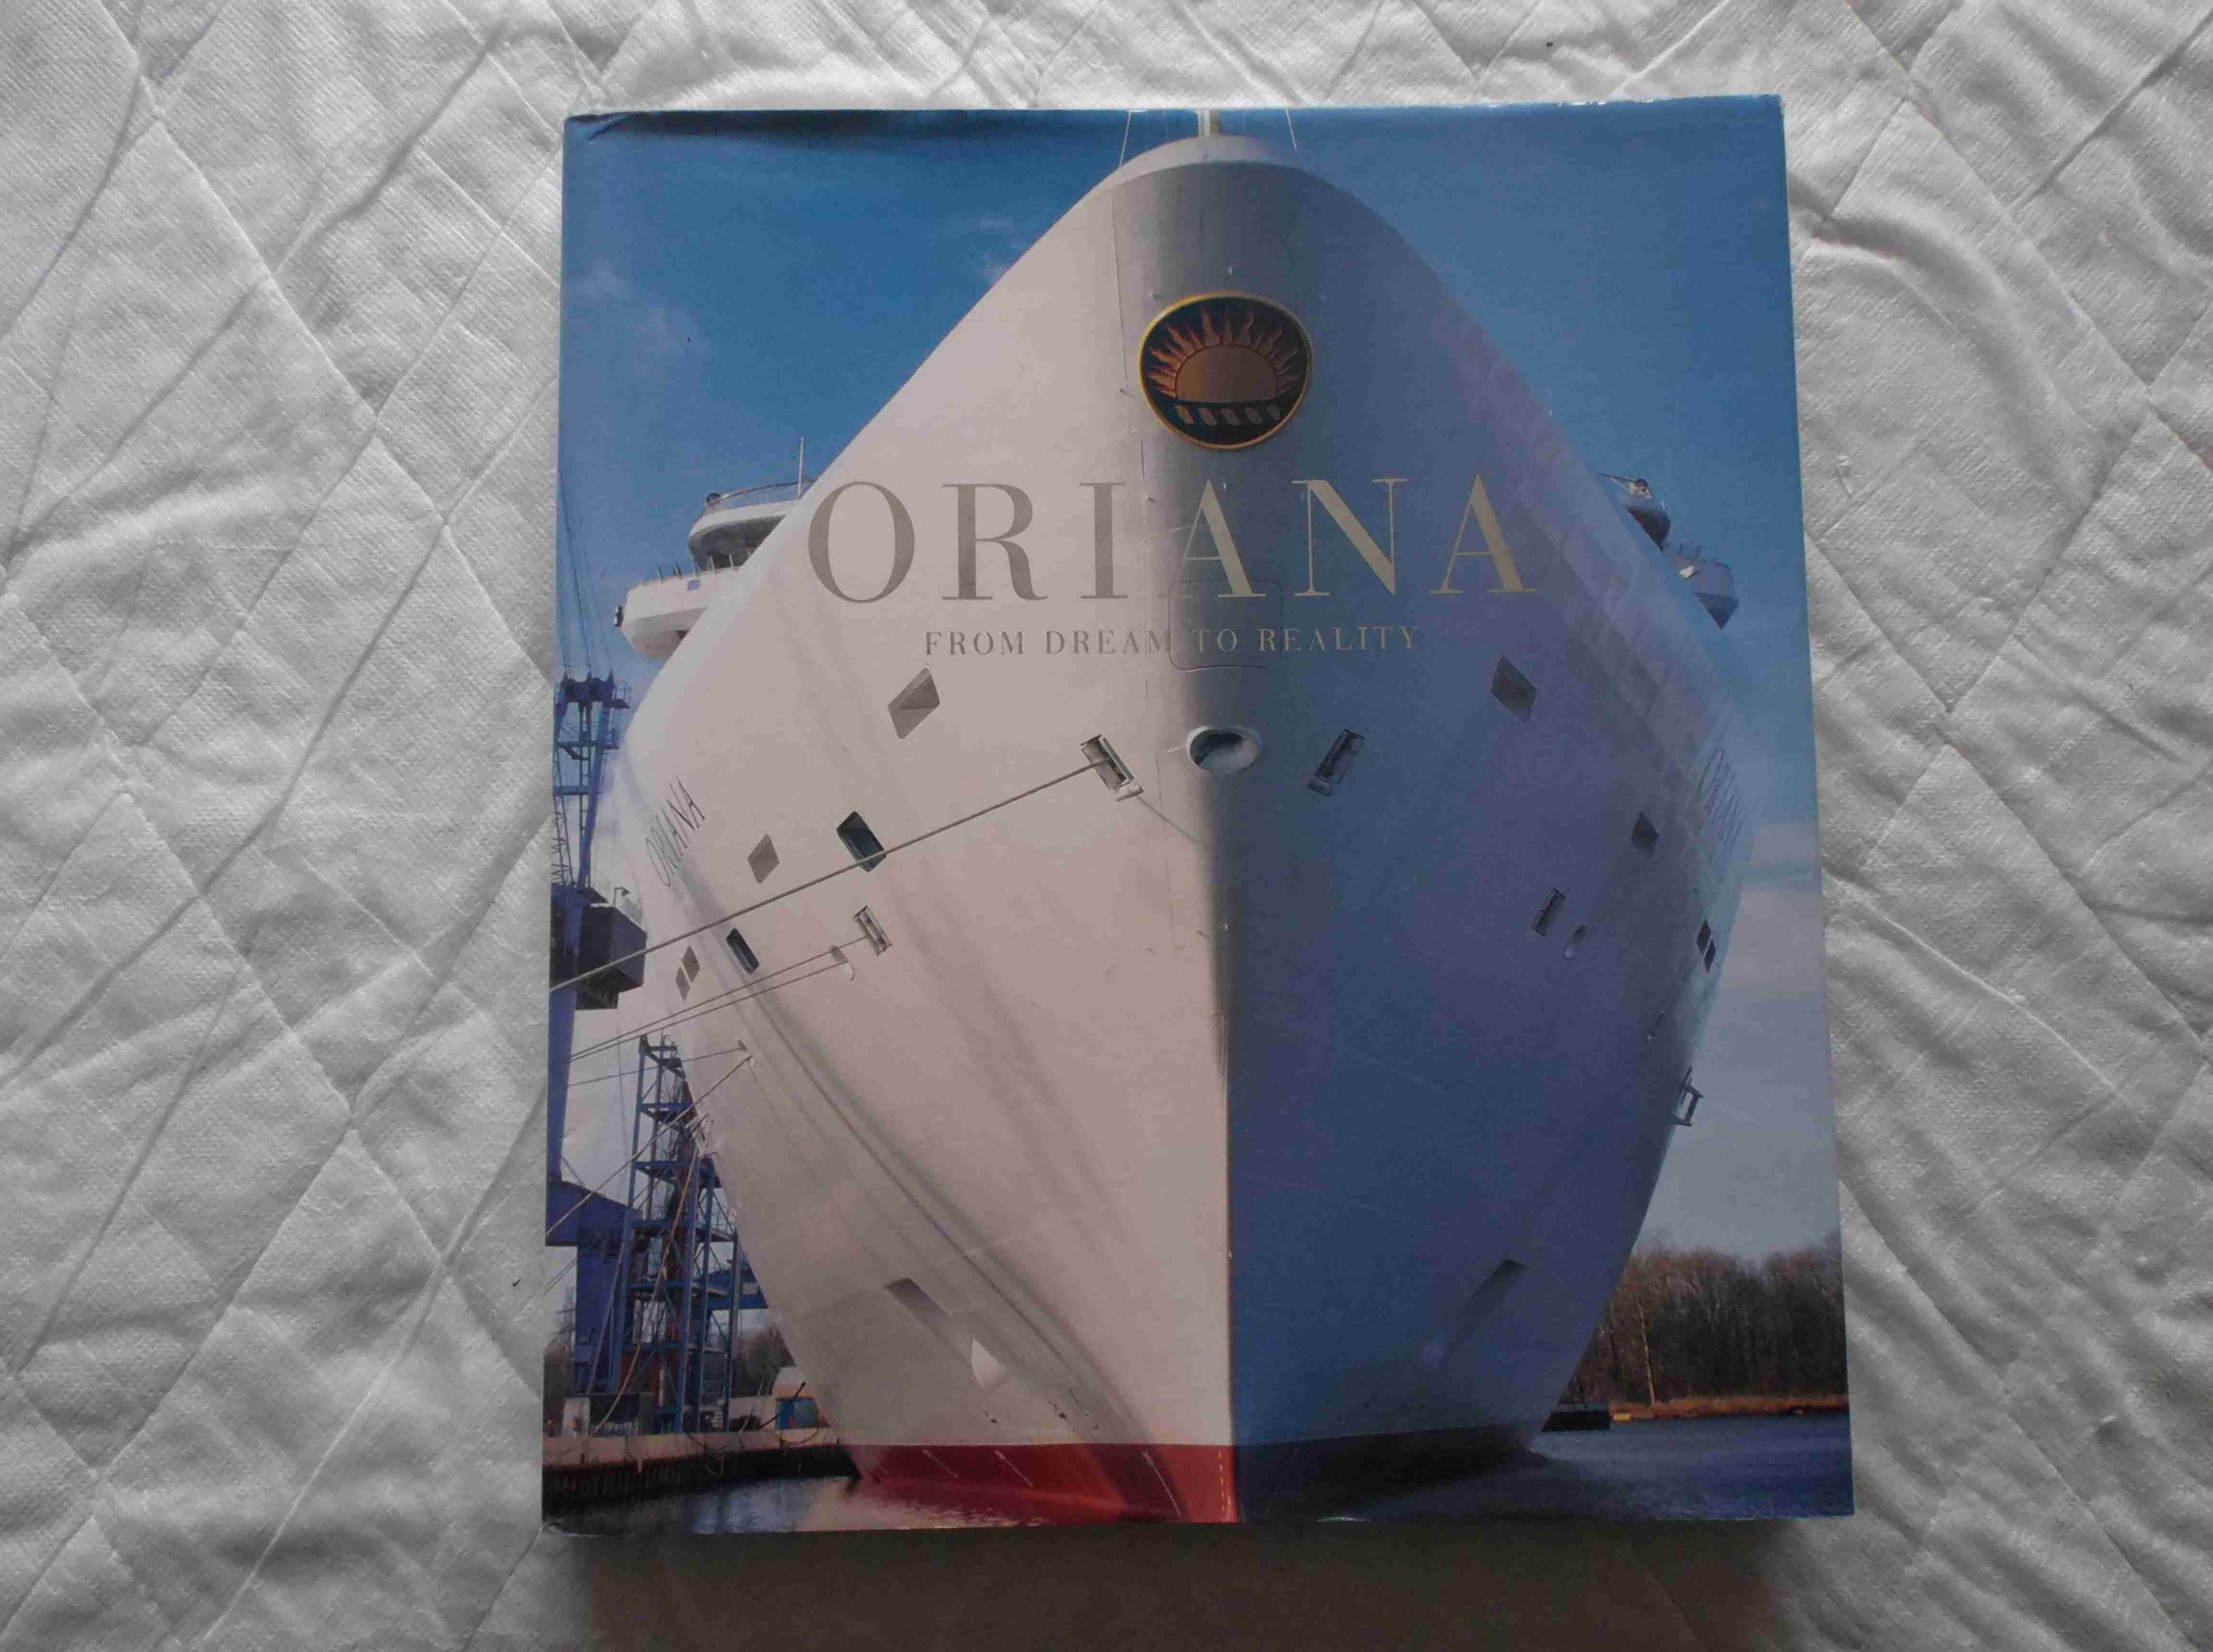 SUPERB BOOK ON THE BIRTH OF THE NEW P&O LINE VESSEL THE ORIANA